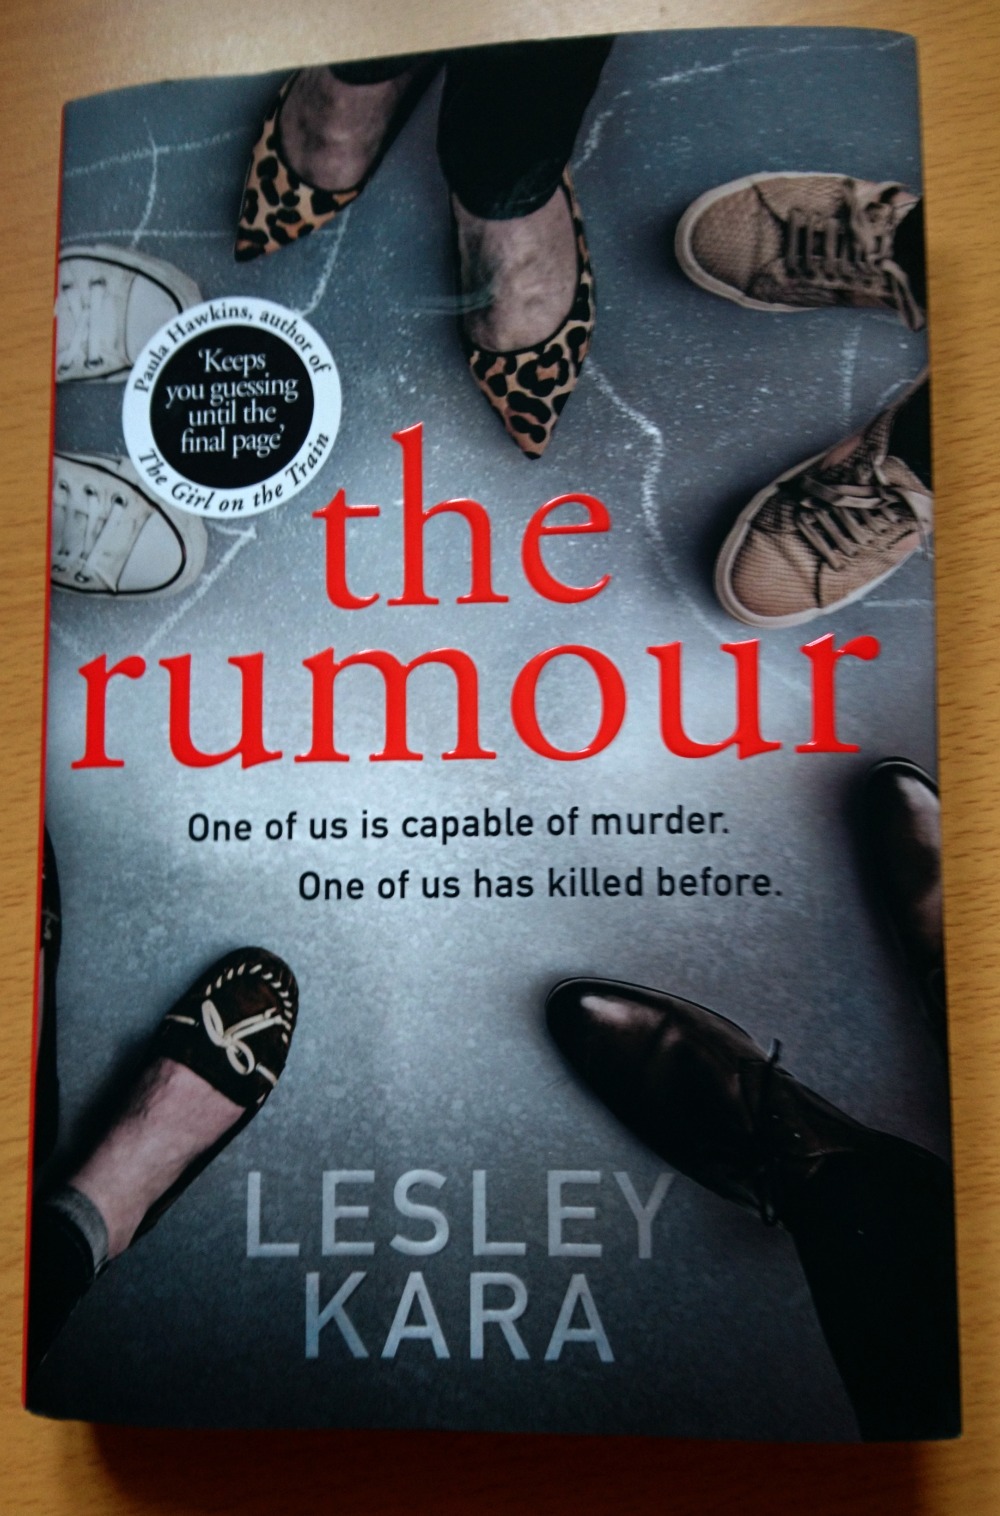 The Rumour by Lesley Kara book cover